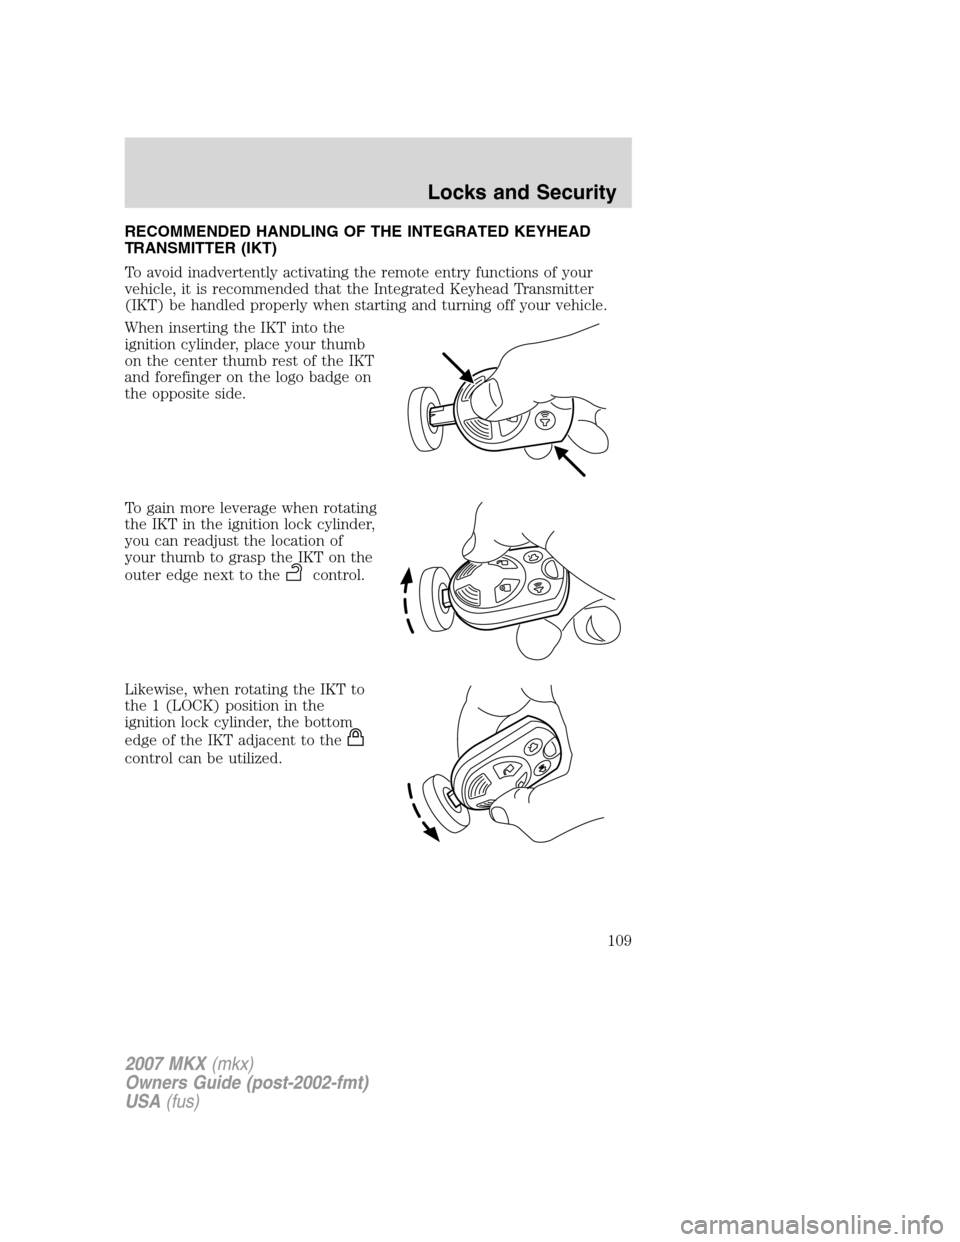 LINCOLN MKX 2007  Owners Manual RECOMMENDED HANDLING OF THE INTEGRATED KEYHEAD
TRANSMITTER (IKT)
To avoid inadvertently activating the remote entry functions of your
vehicle, it is recommended that the Integrated Keyhead Transmitter